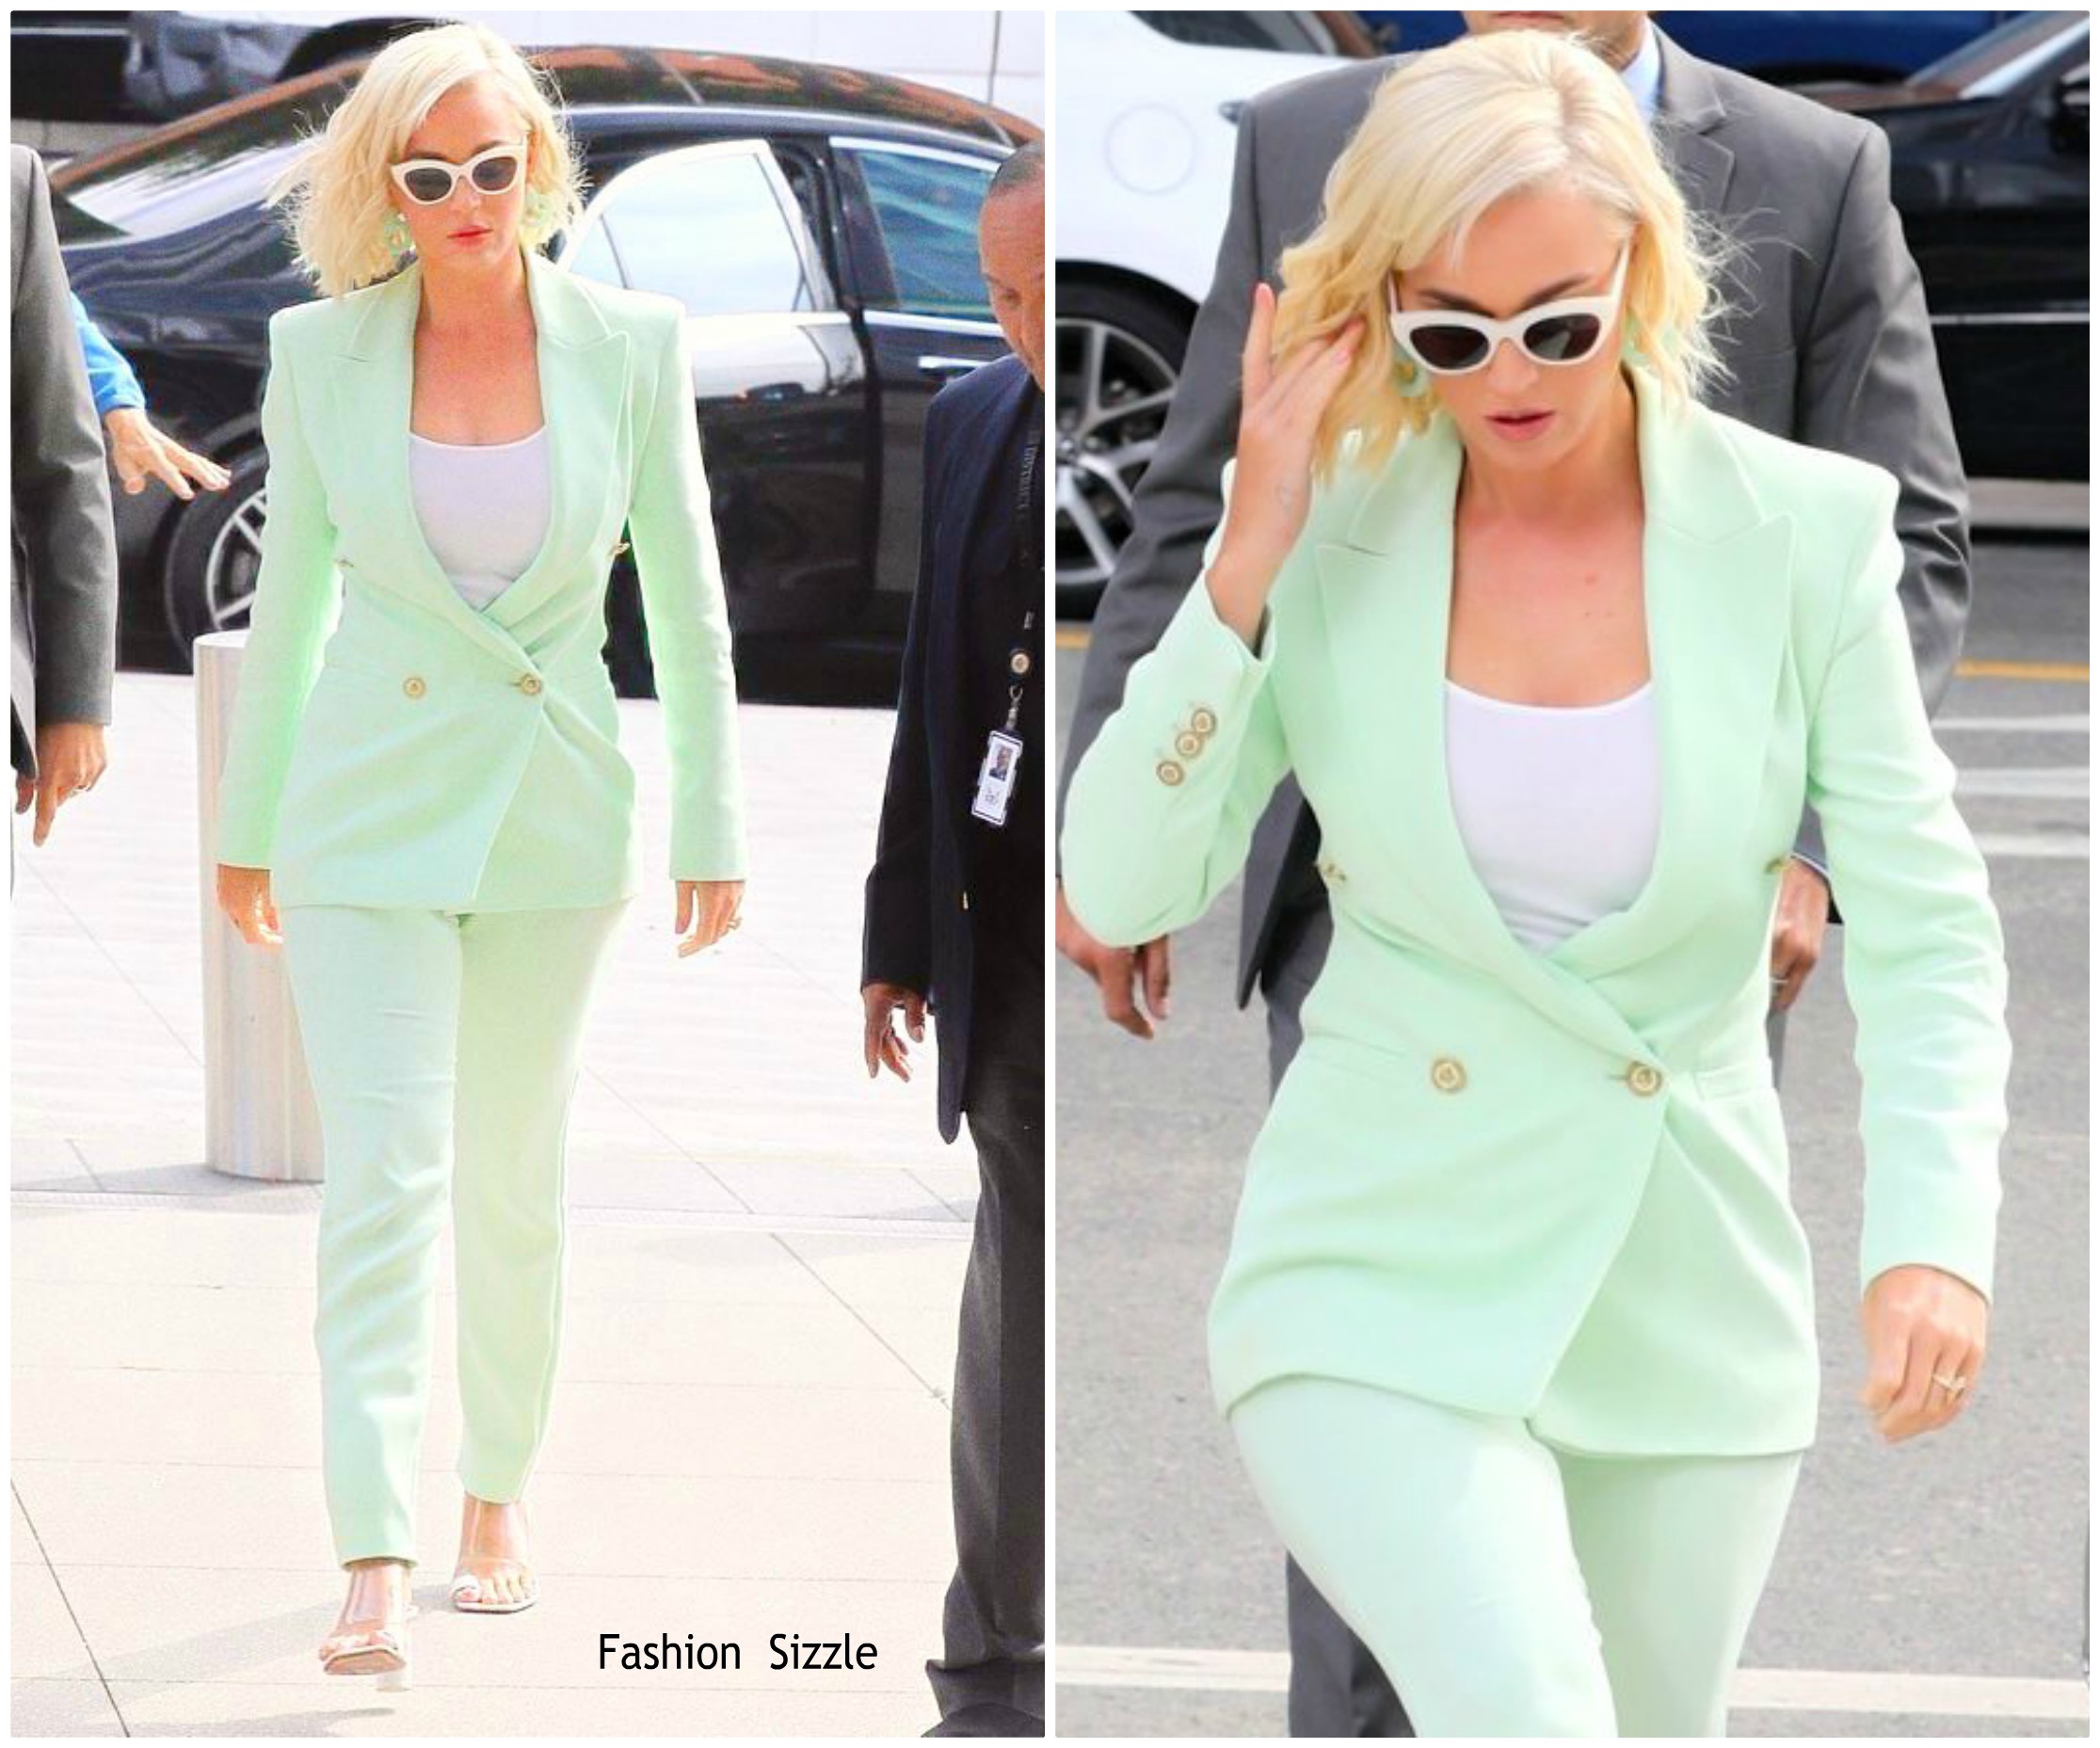 katy-perry-in-versce-la-federal-courthouse